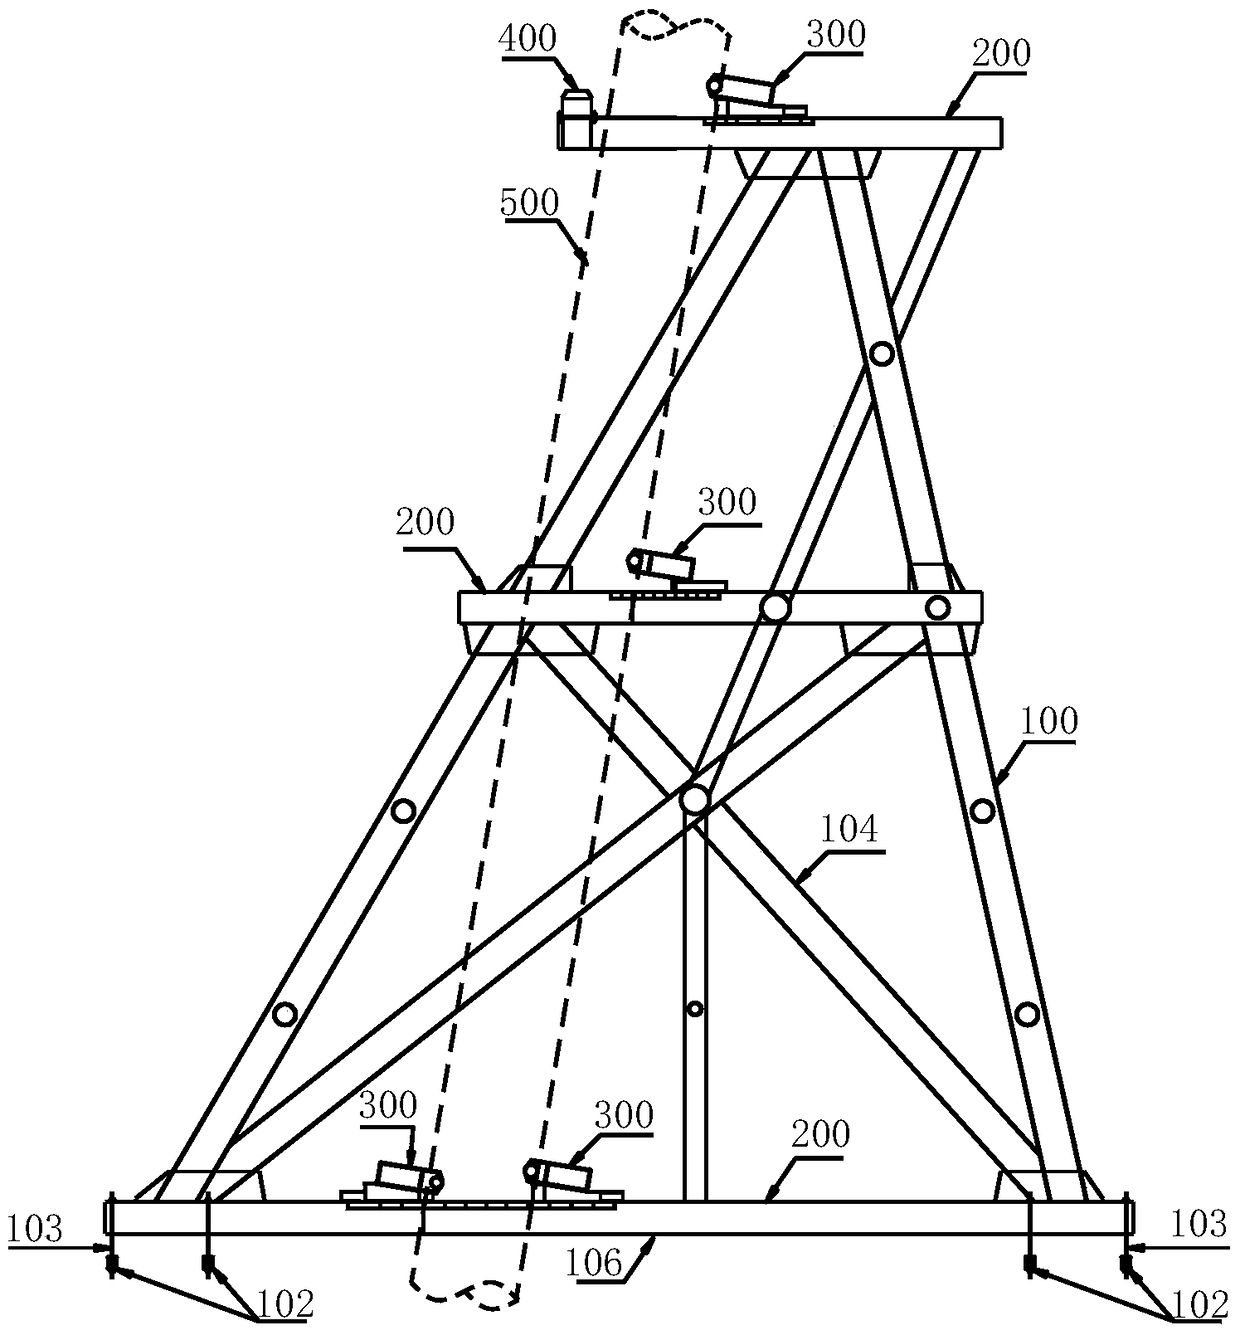 A multi-level guide bracket for oblique insertion and driving of ultra-long diameter piles